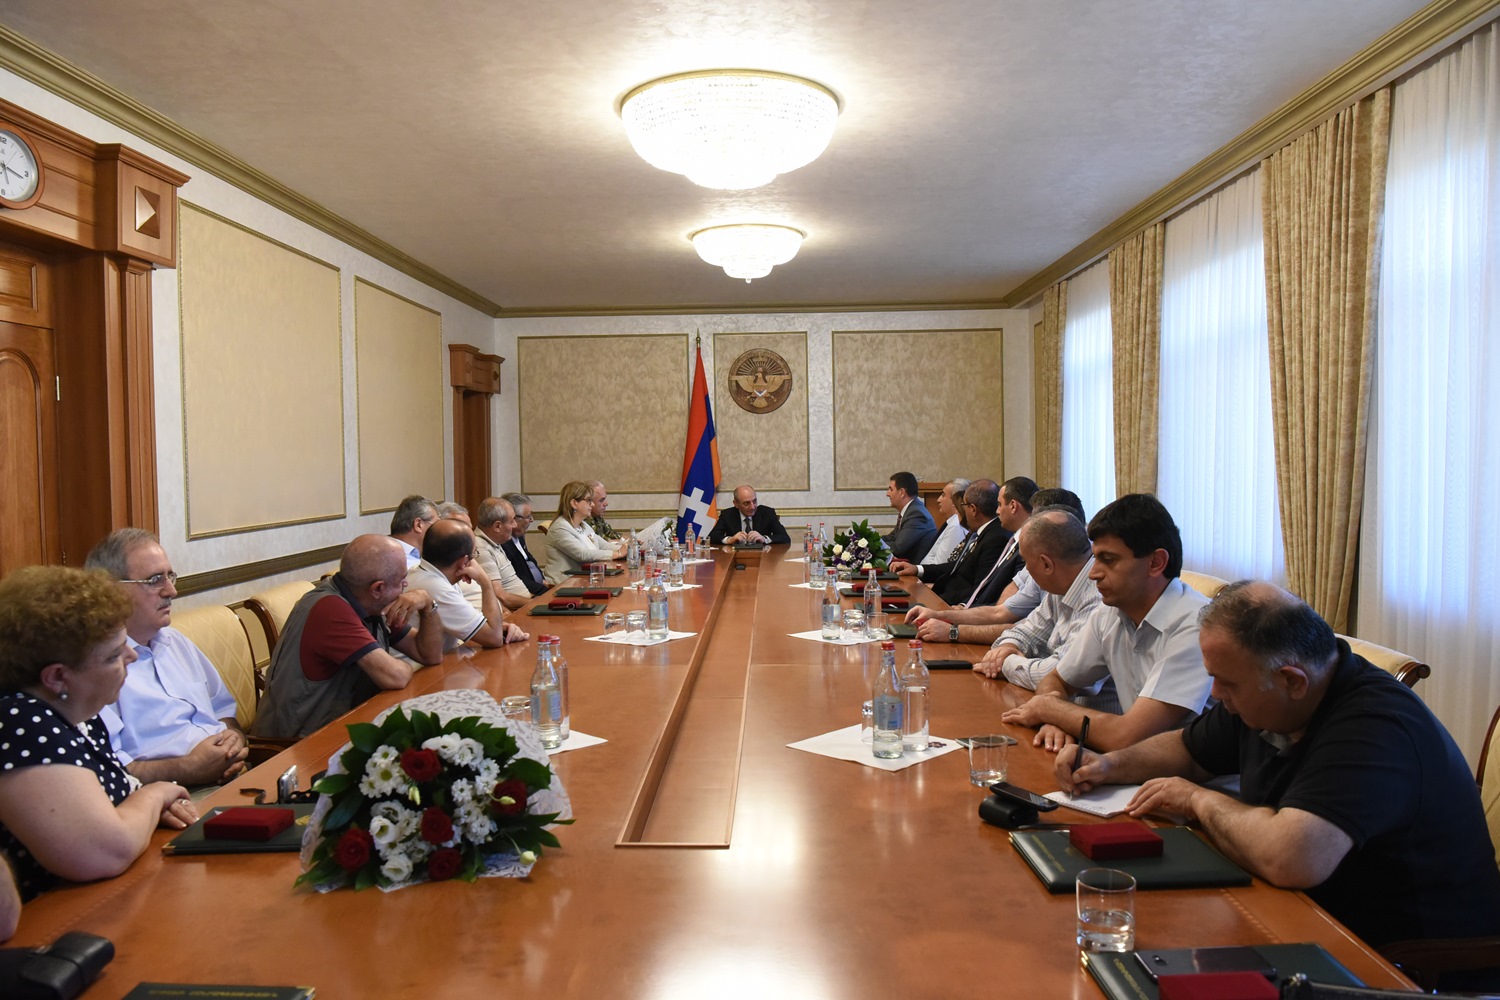 Bako Sahakyan received the delegation of the Public Council under the Armenian defense minister